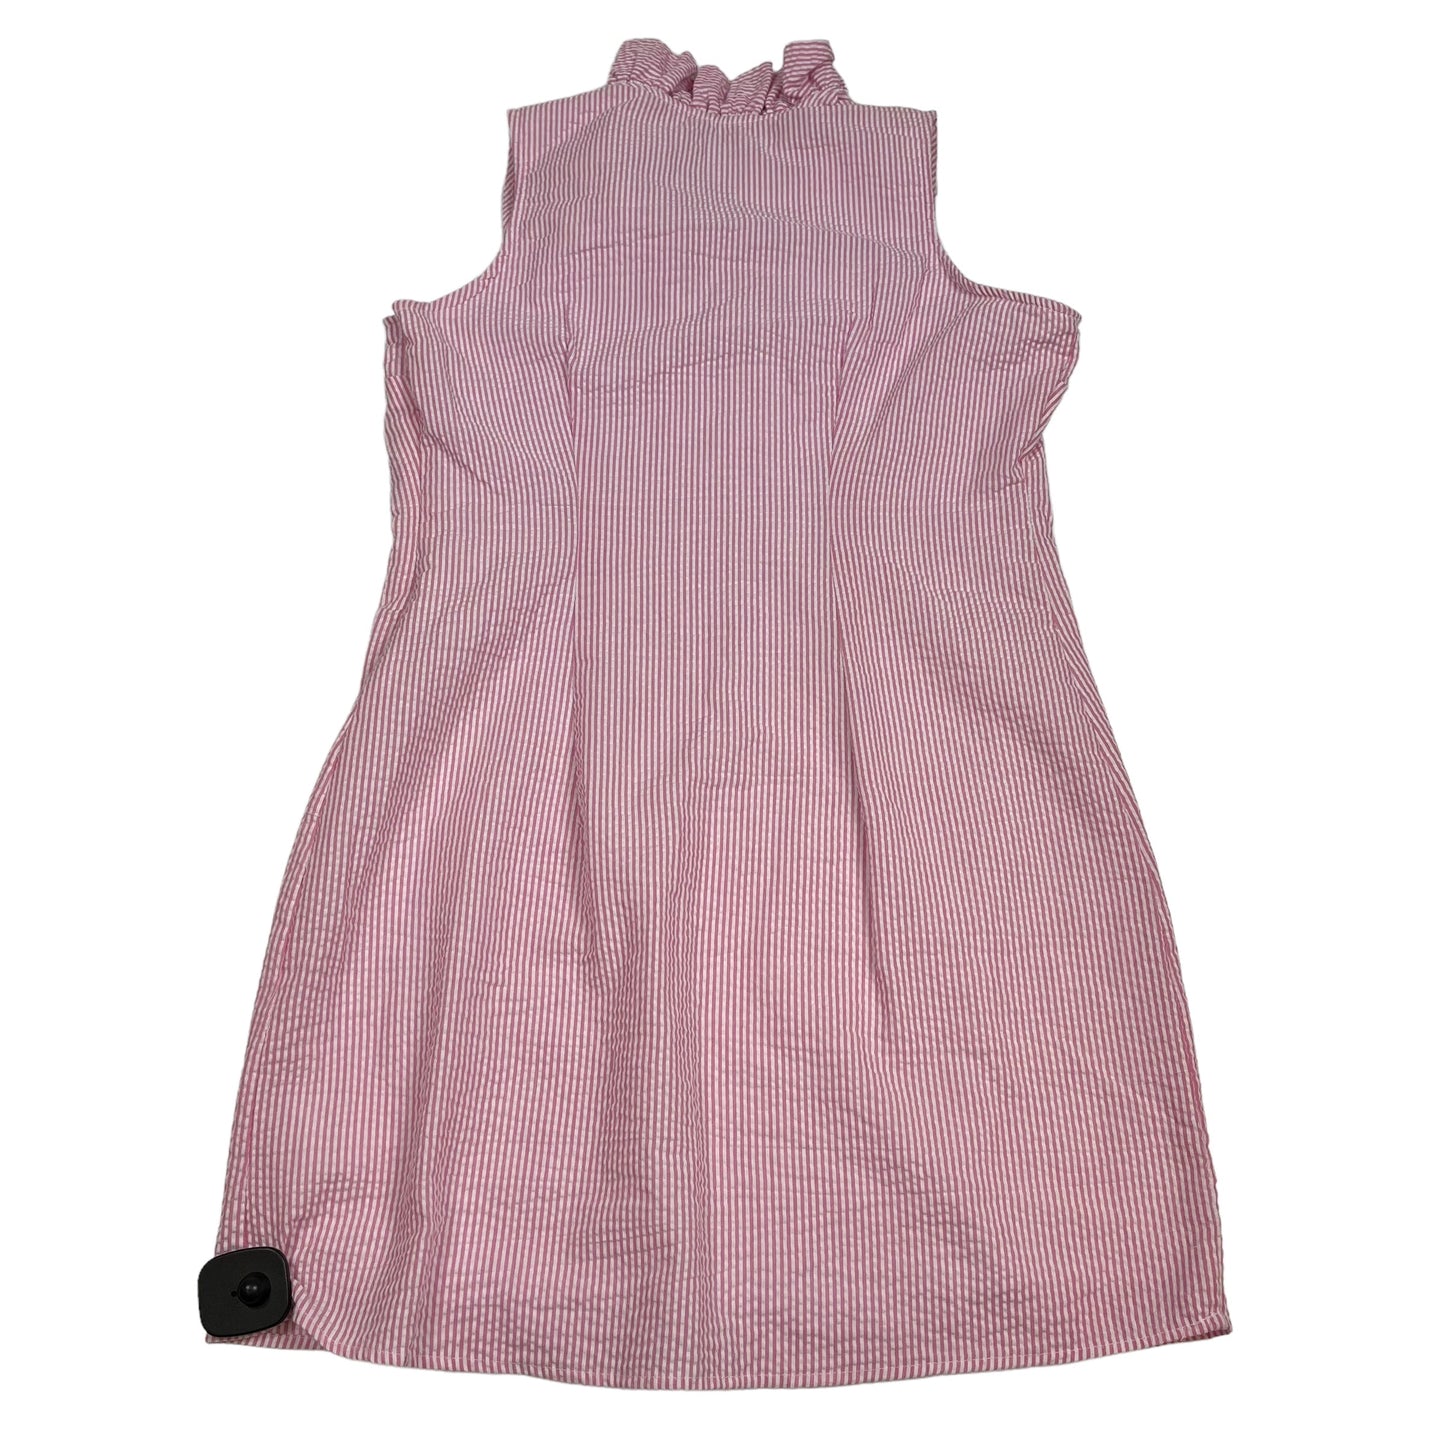 Dress Casual Short By Mudpie  Size: M